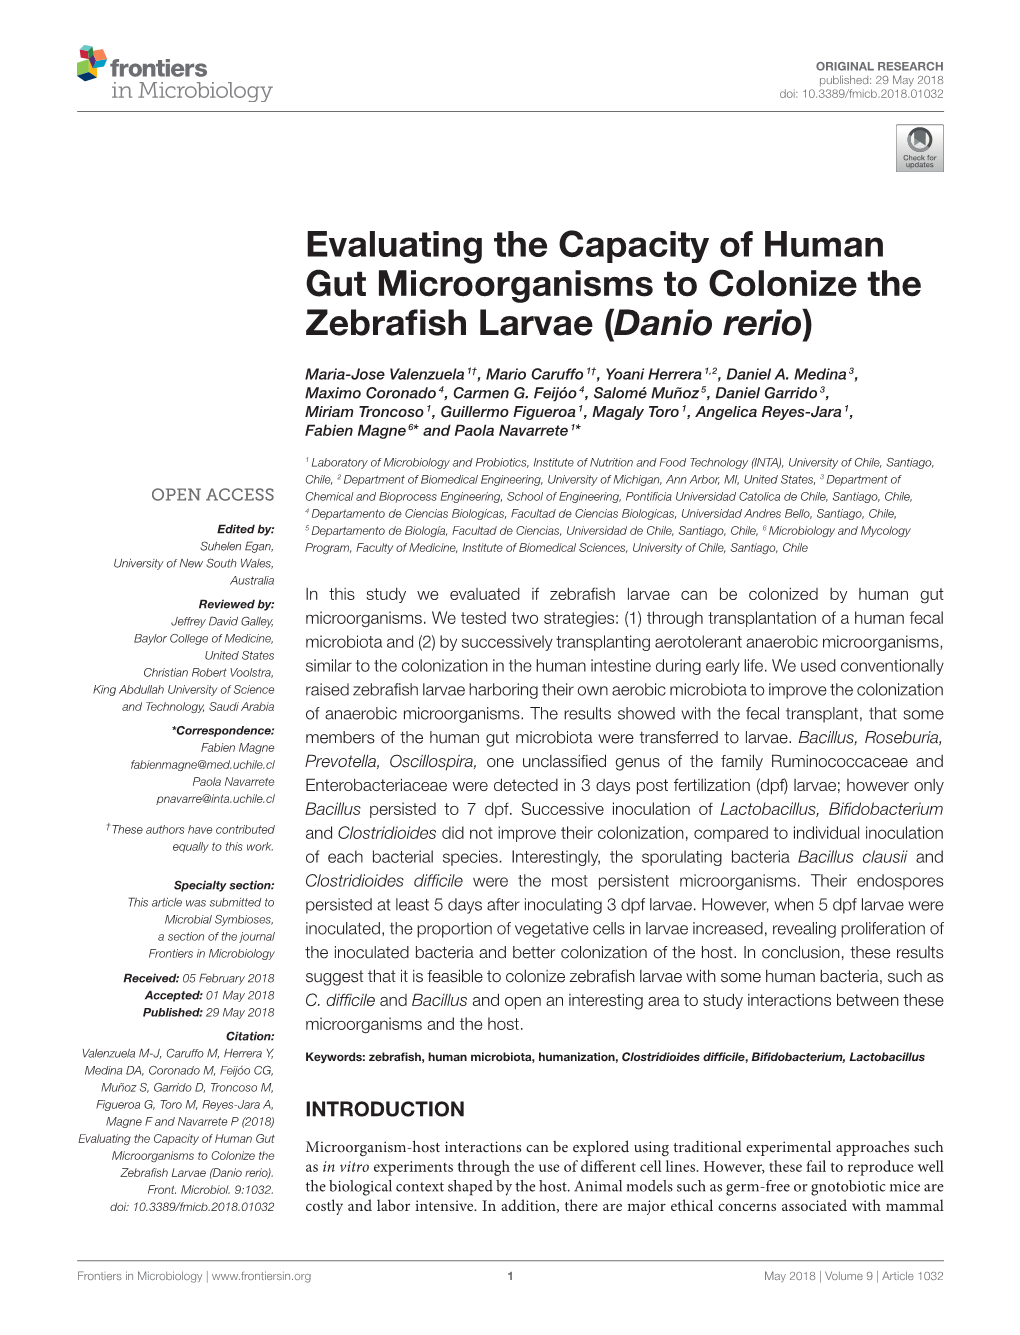 Evaluating the Capacity of Human Gut Microorganisms to Colonize the Zebraﬁsh Larvae (Danio Rerio)